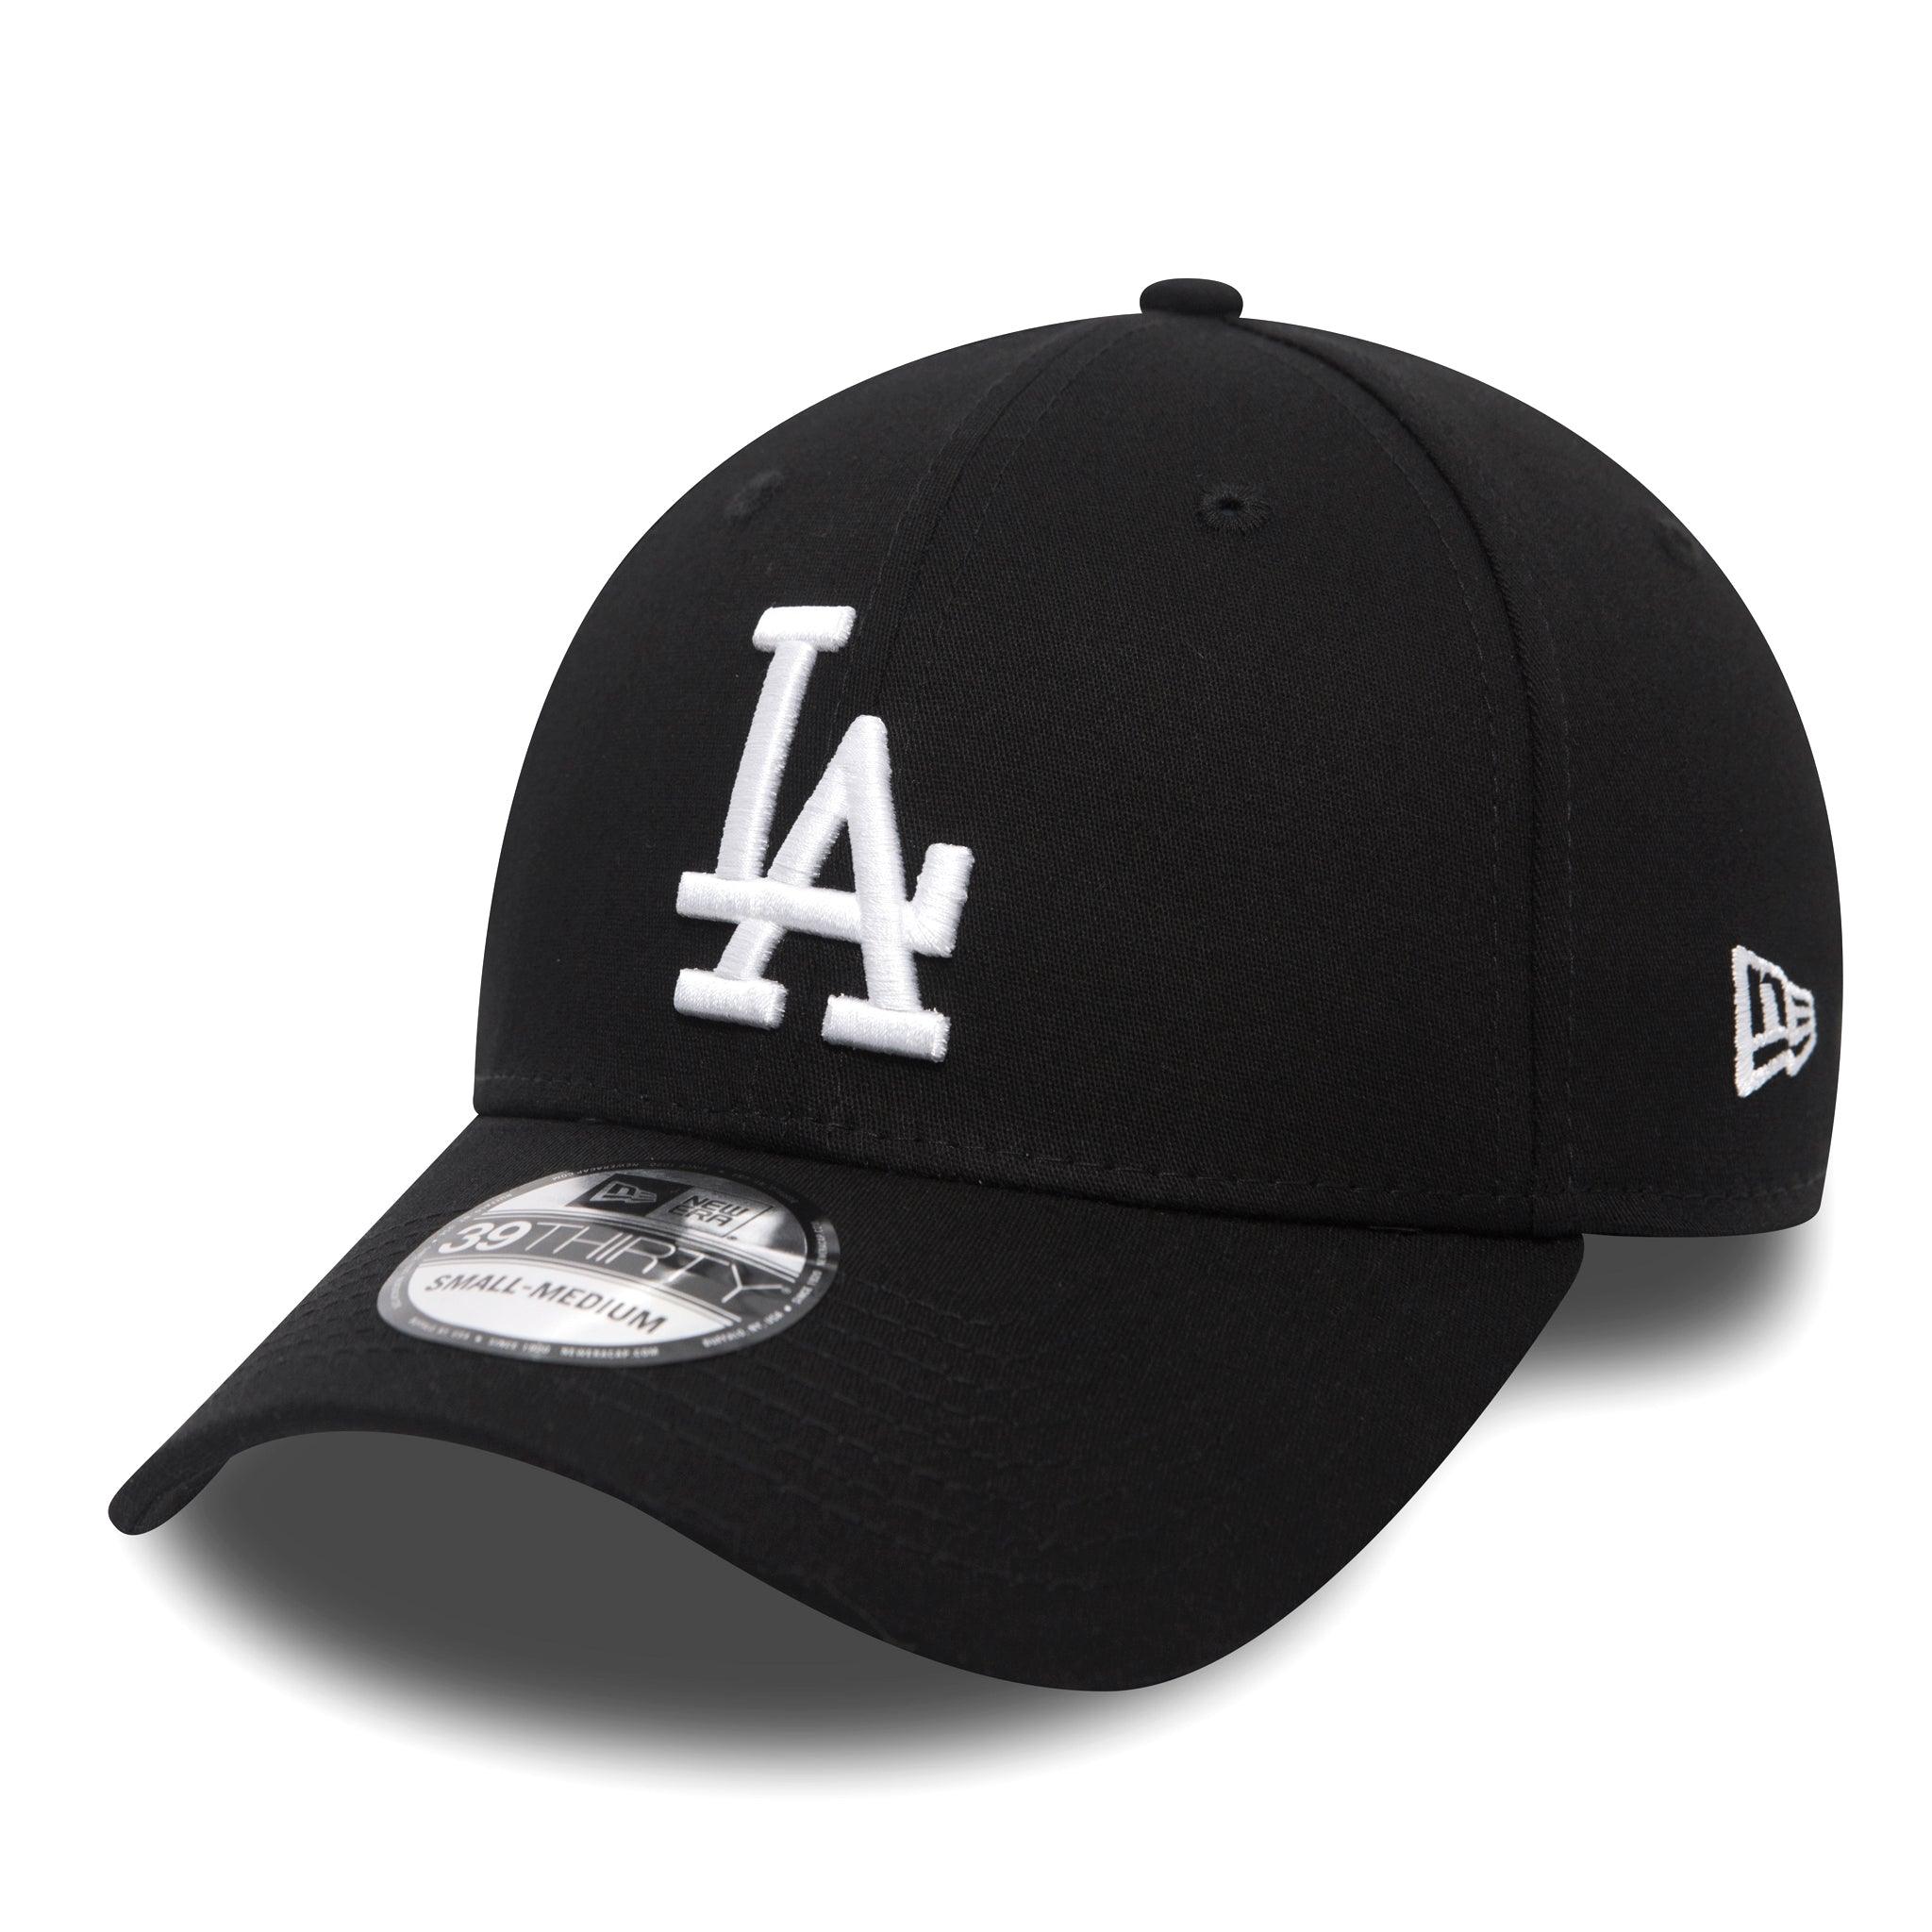 NEW ERA 39THIRTY LOS ANGELES DODGERS BLACK FITTED CAP - FAM